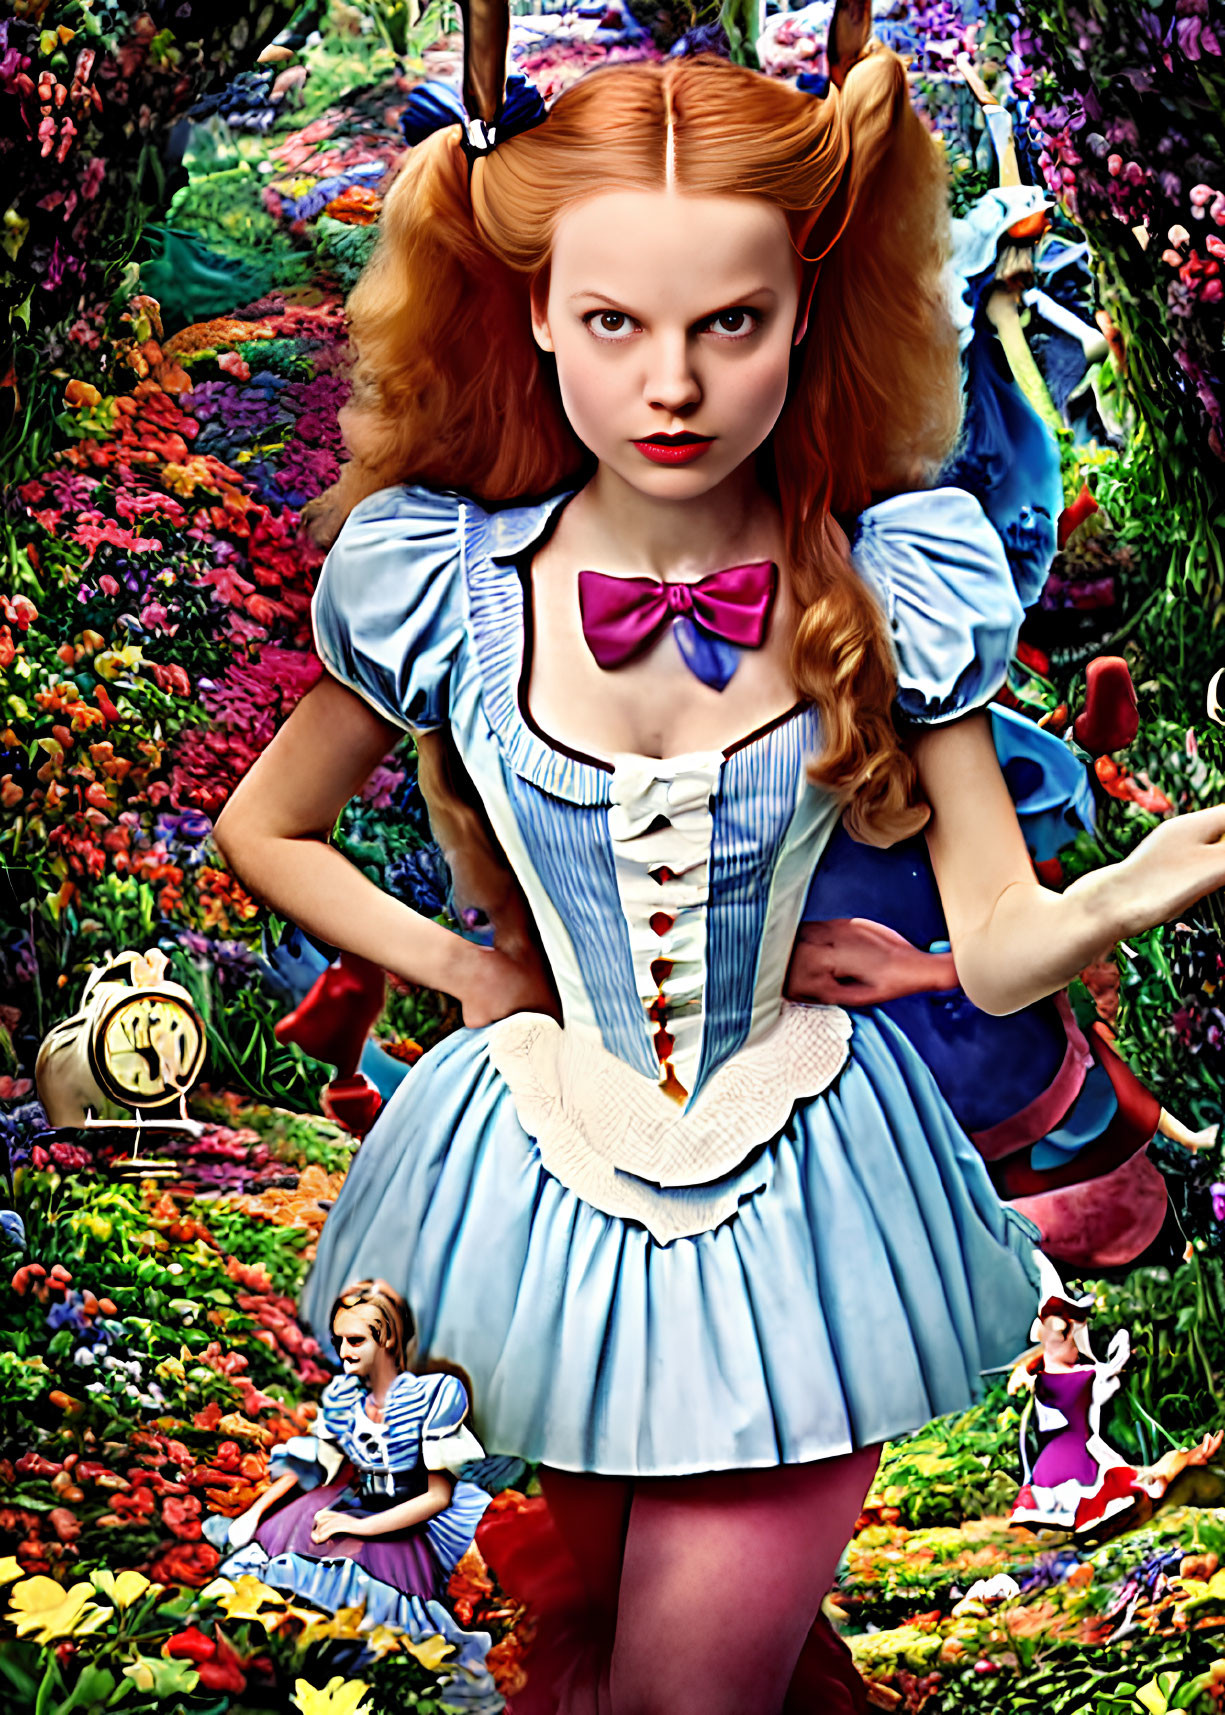 Colorful Surreal Alice in Wonderland Interpretation with Large Alice and Flower-Rich Setting